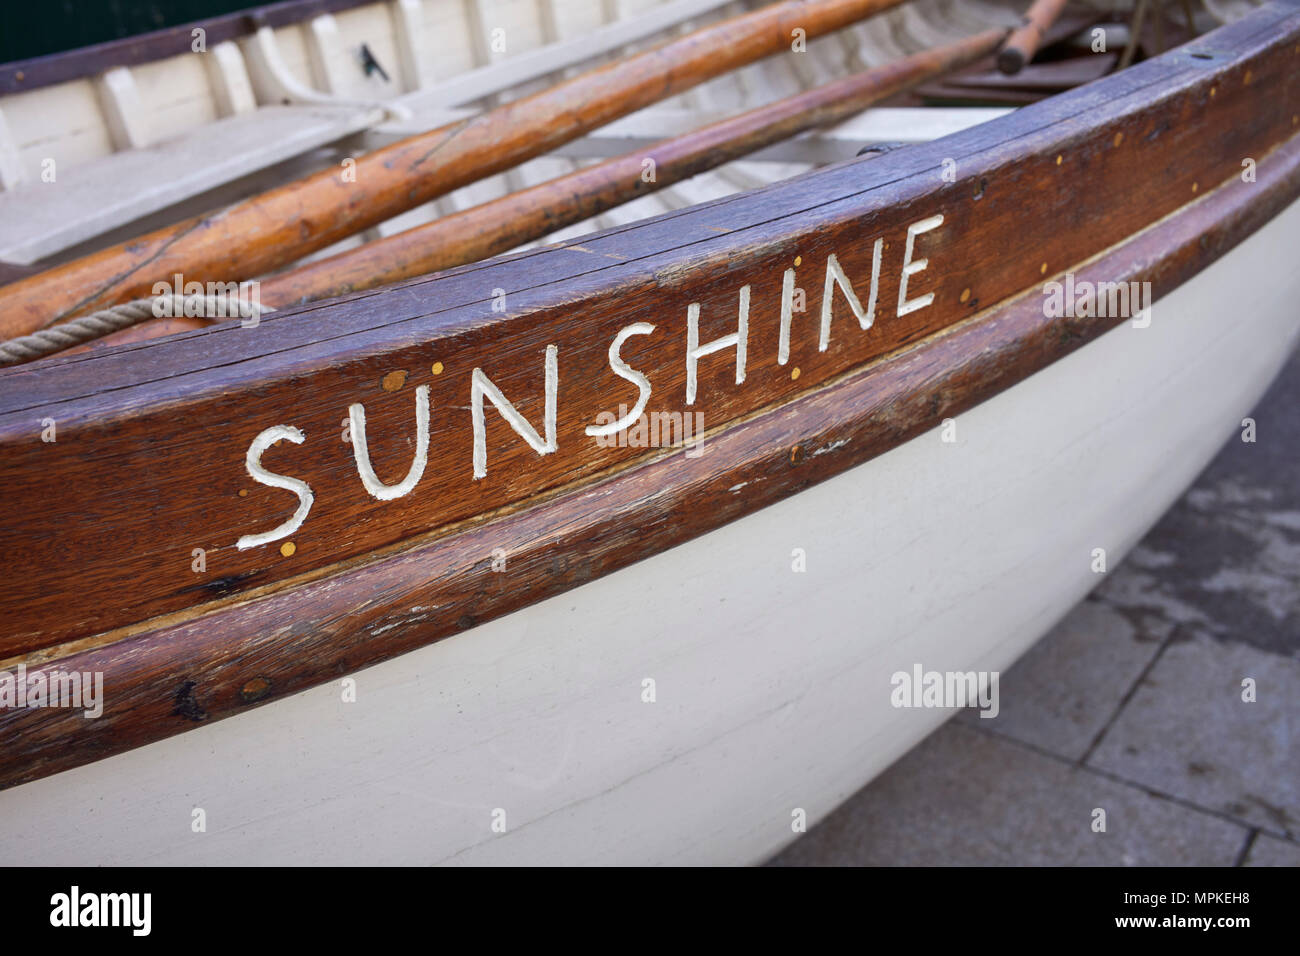 Thames skiff boat Sunshine showing the carved in lettering Stock Photo